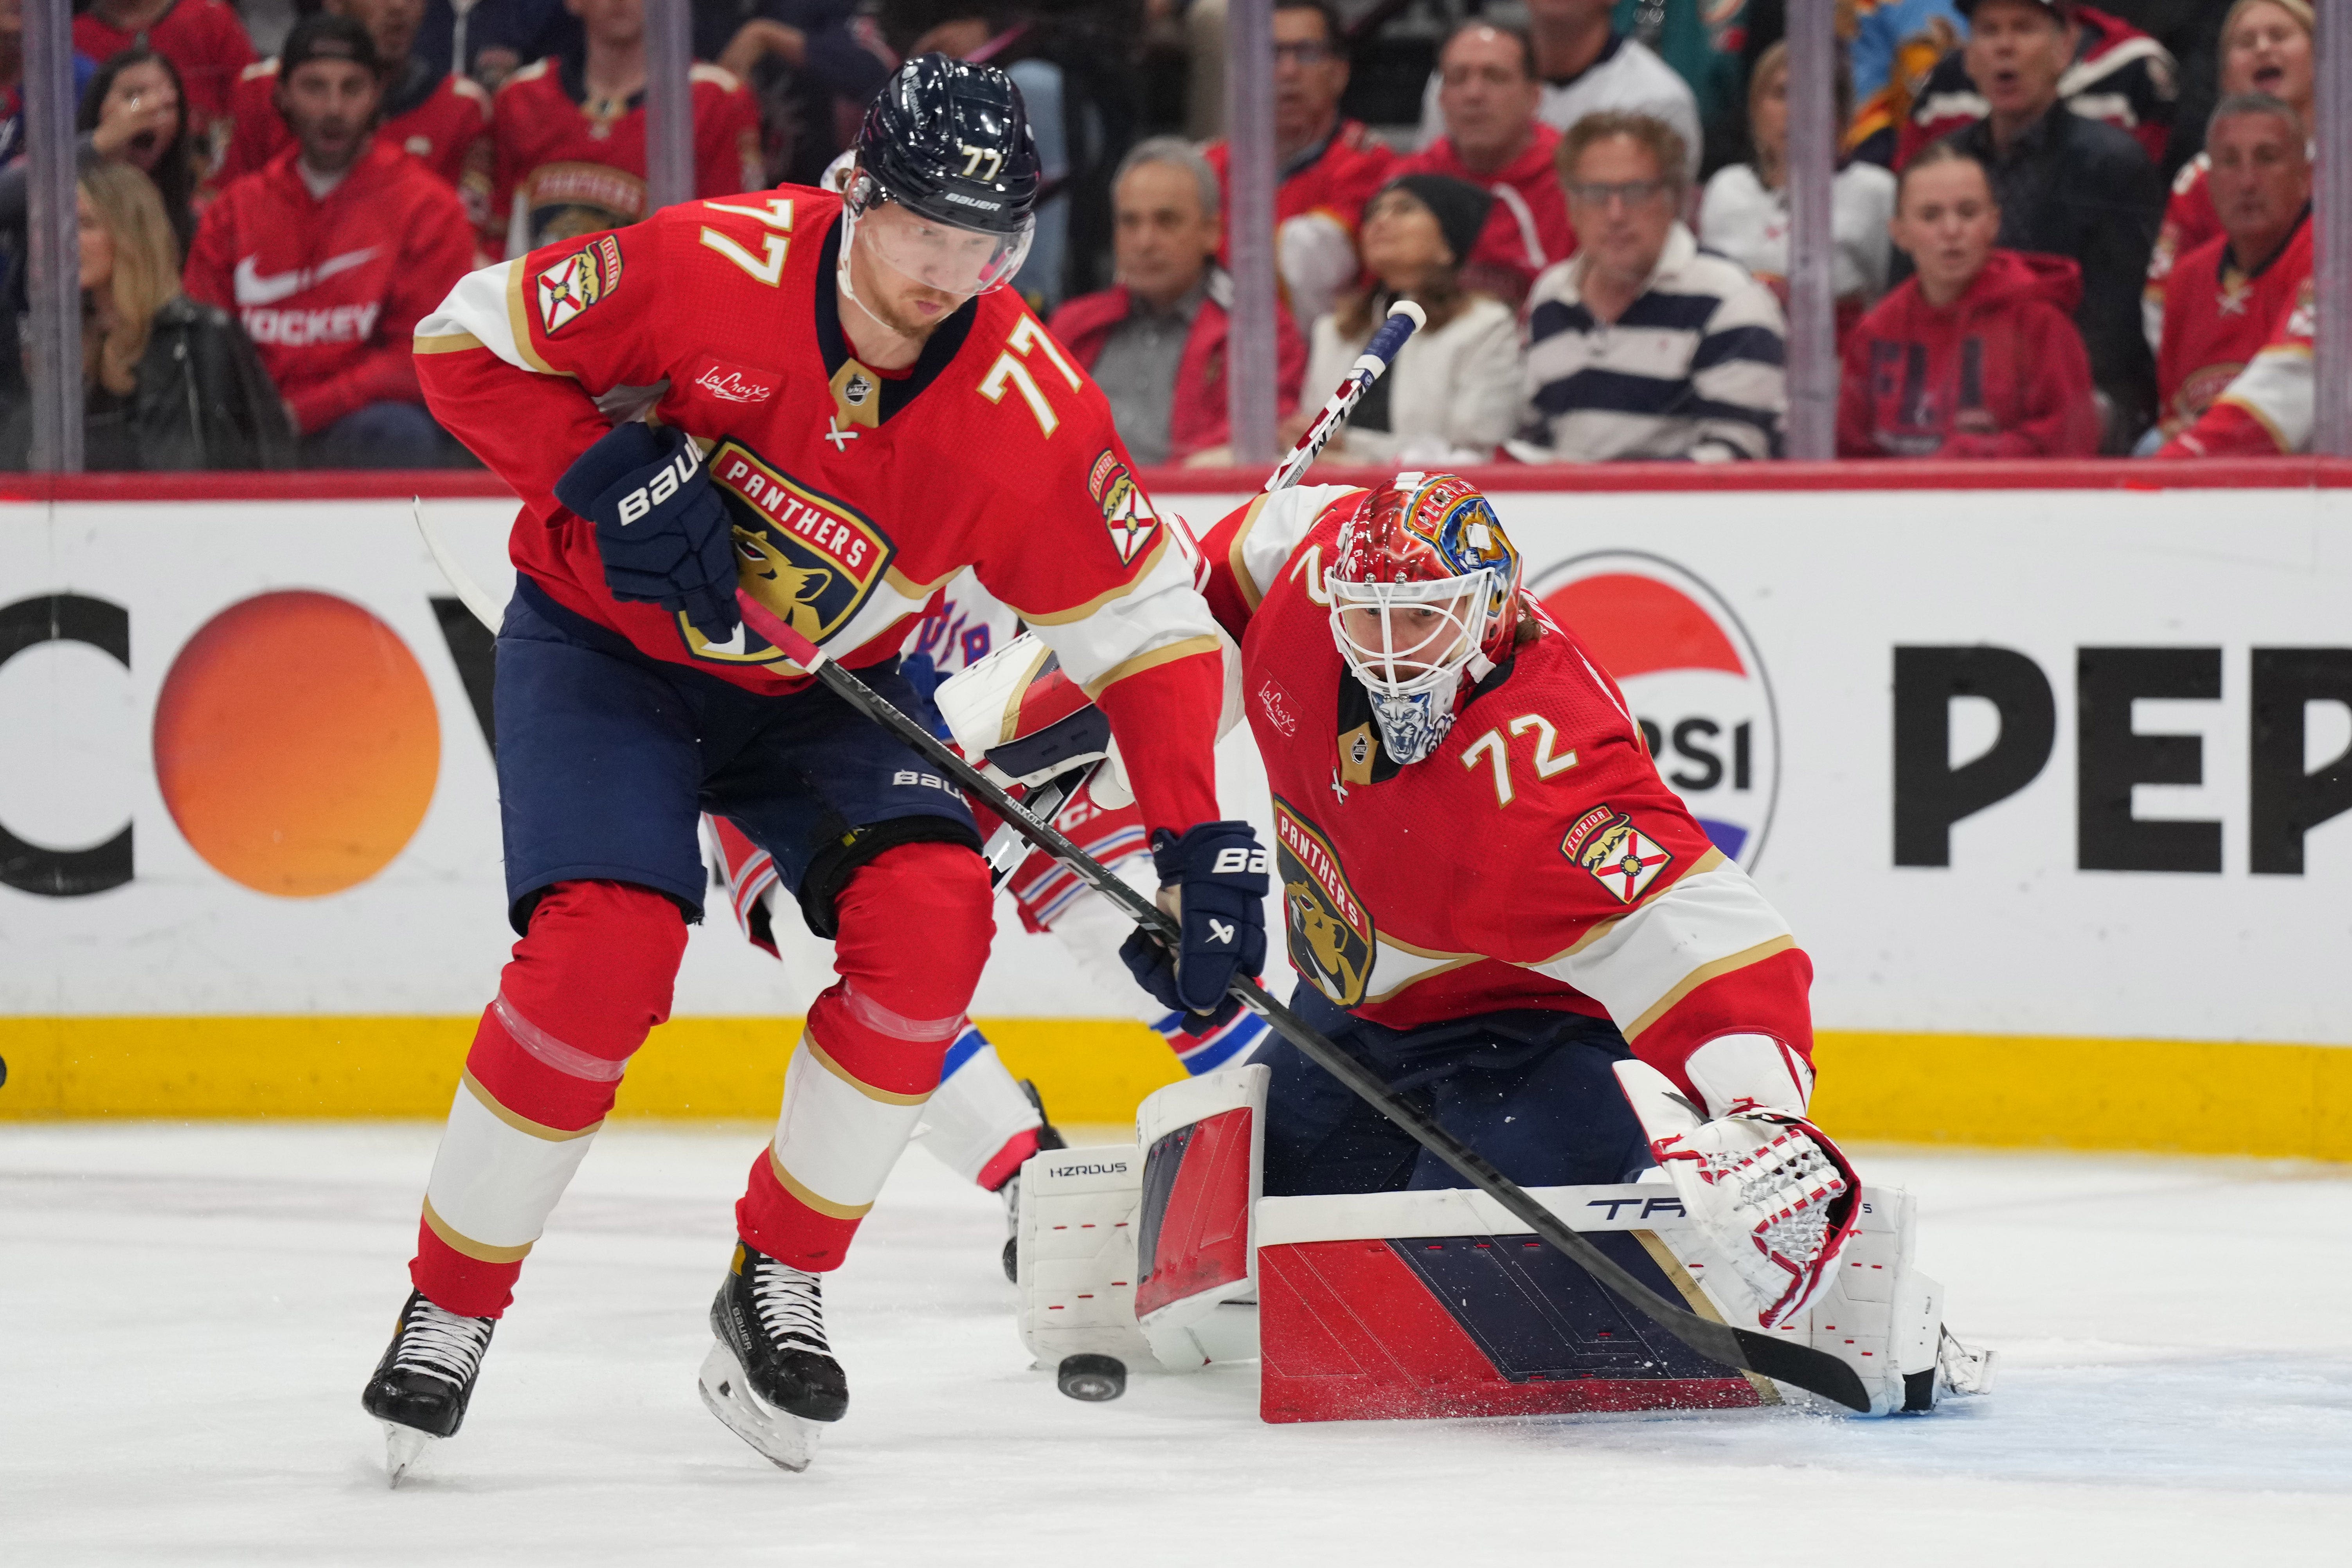 Florida Panthers return to Stanley Cup Final with Game 6 win against New York Rangers